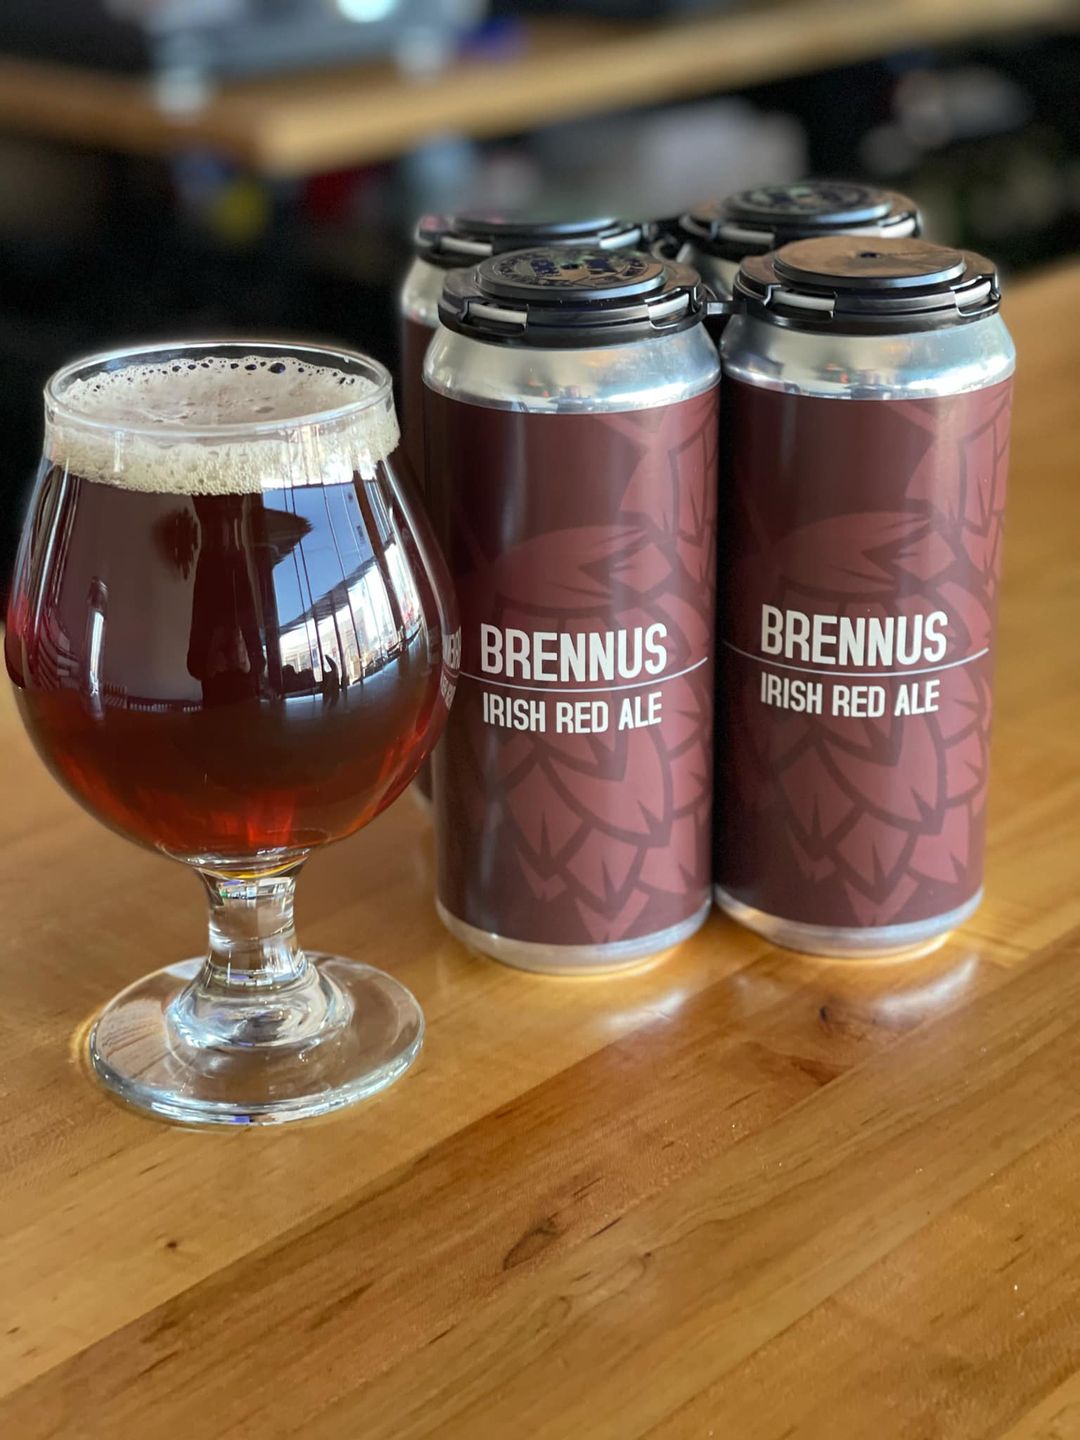 A four pack and a glass of Will County Brewing's Brennus